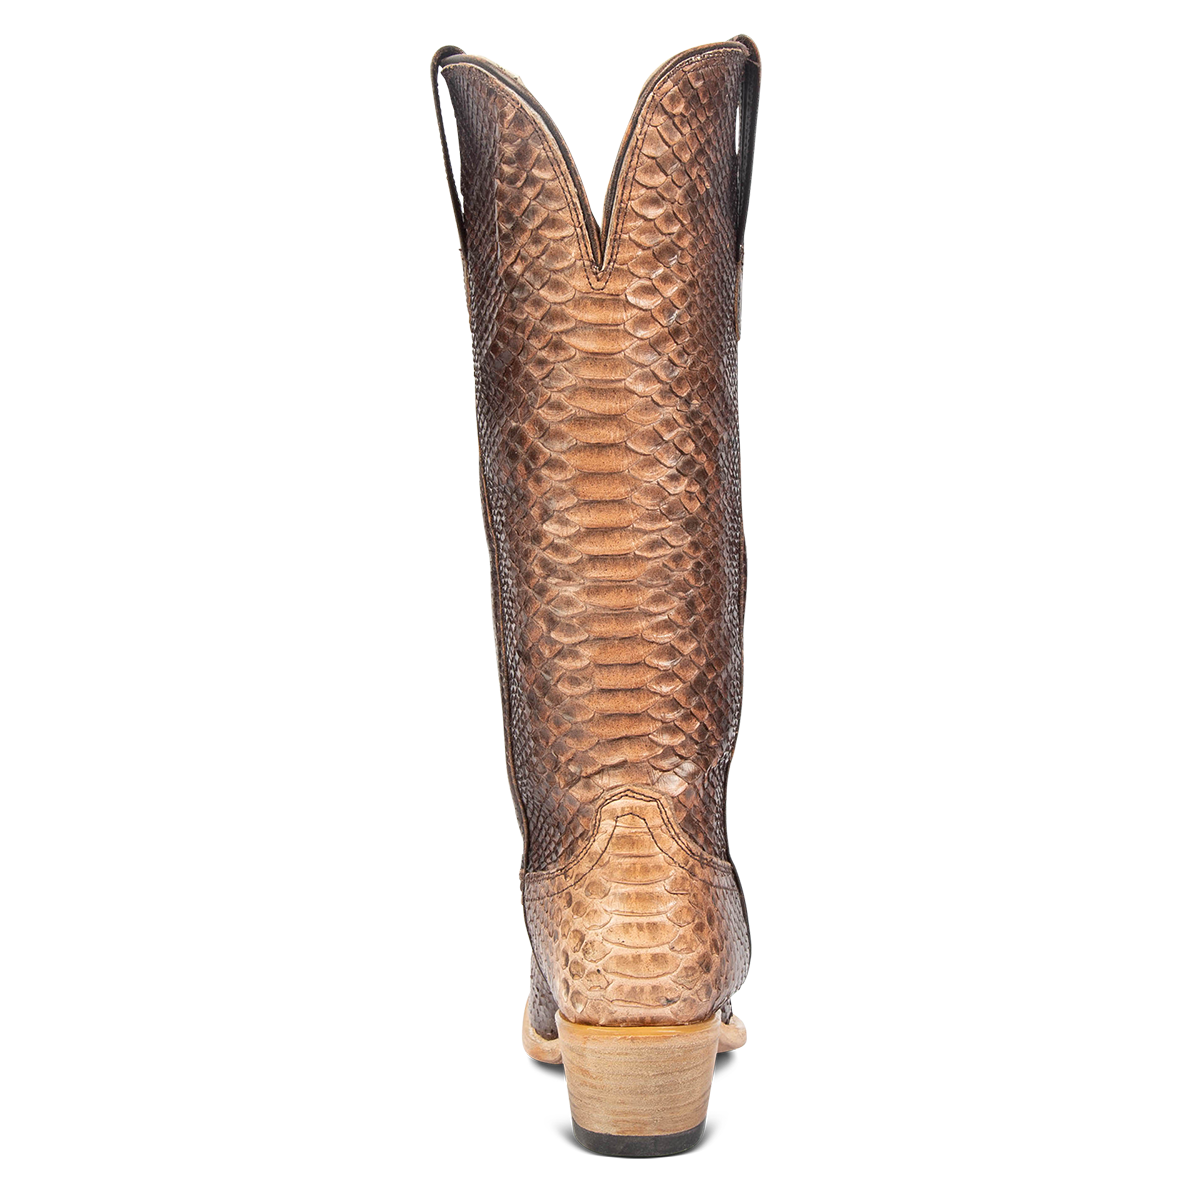 Back view showing back dip and leather heel with western stitch detailing on FREEBIRD women's Woodland peach python leather boot